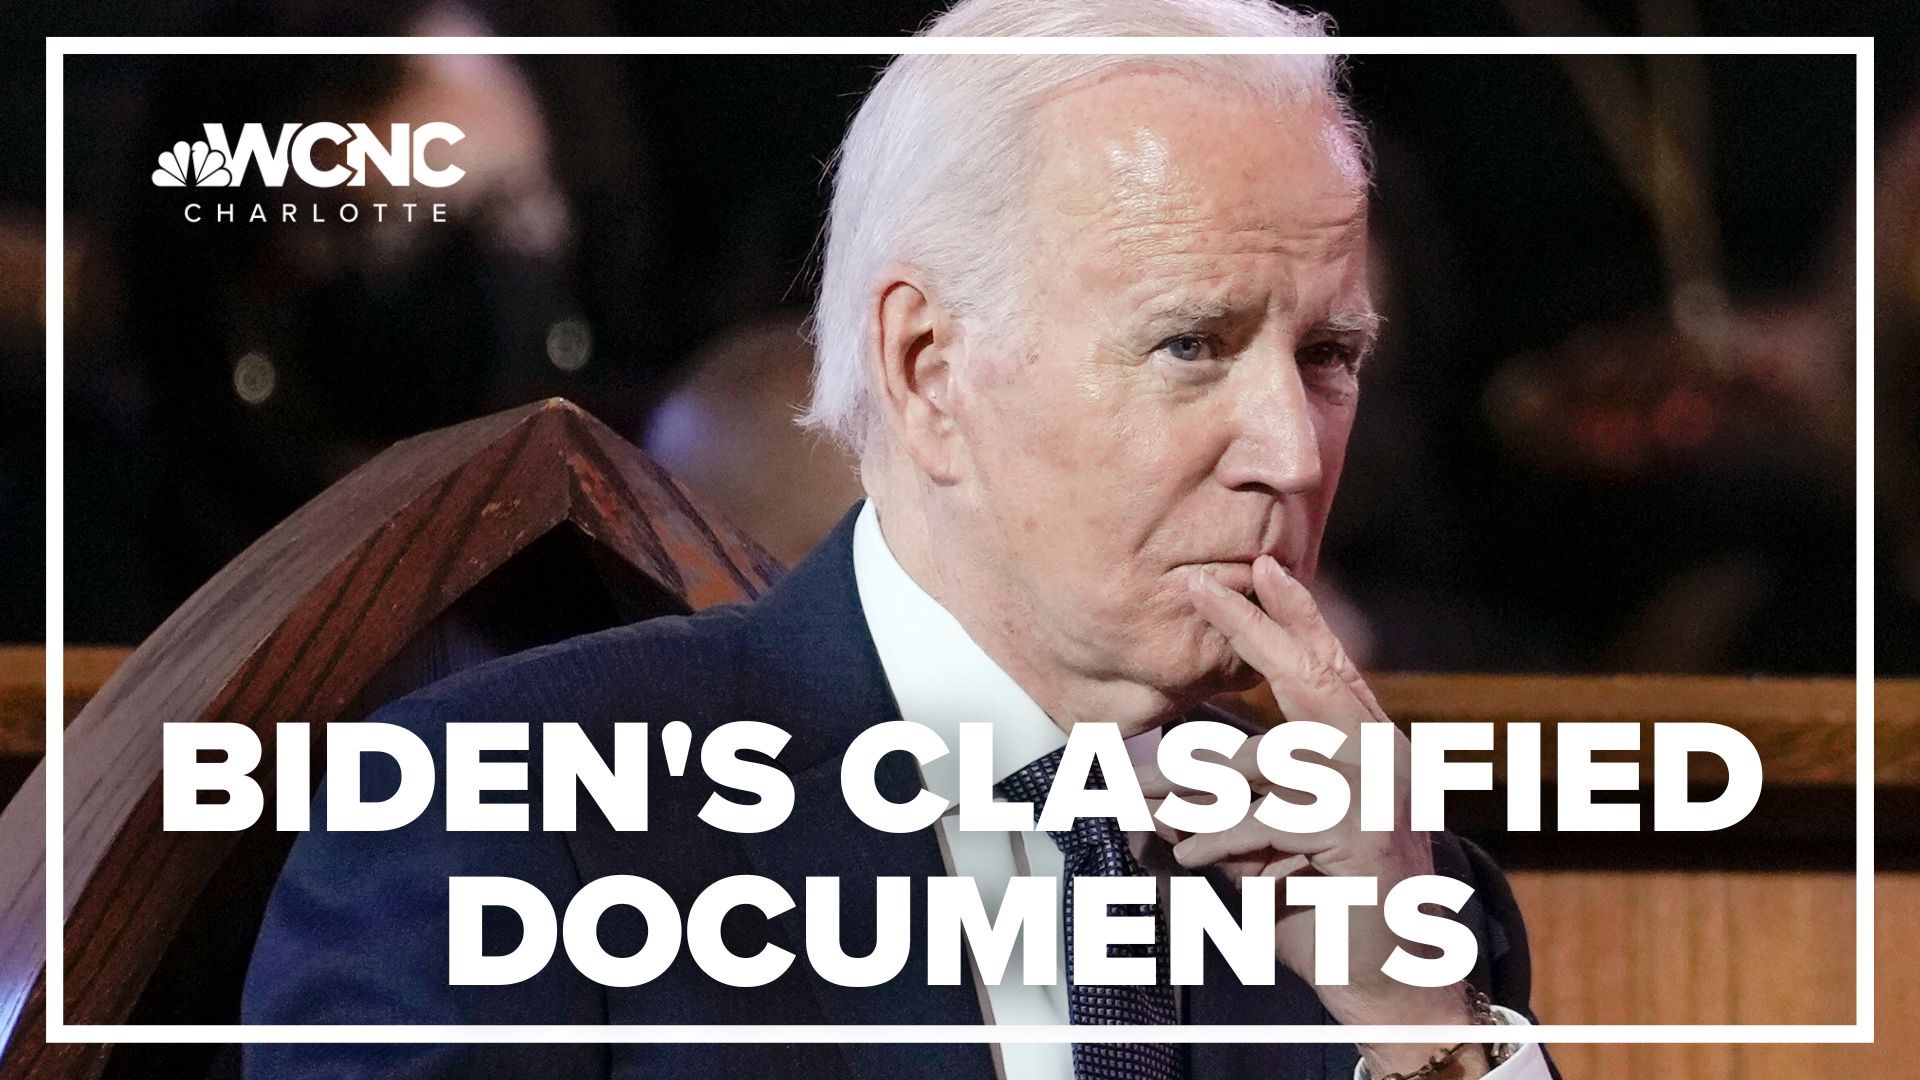 Lawyers for President Joe Biden found more classified documents at his home in Wilmington, Delaware, than previously known, the White House acknowledged Saturday.